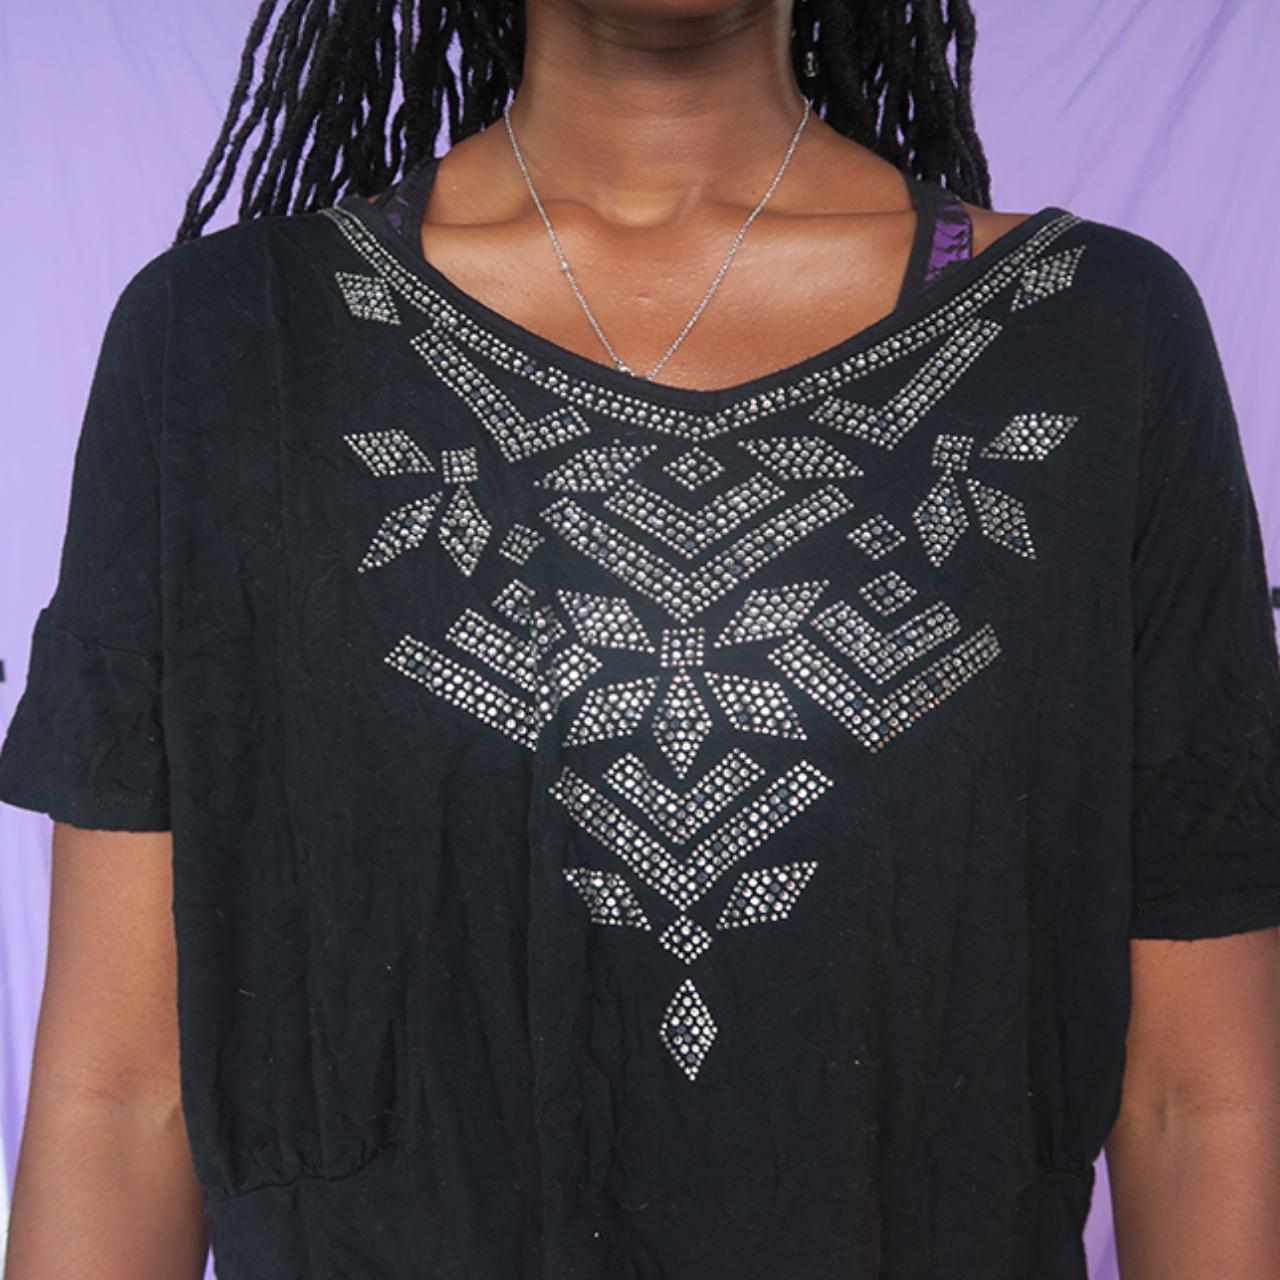 Women's Black and Silver T-shirt (2)